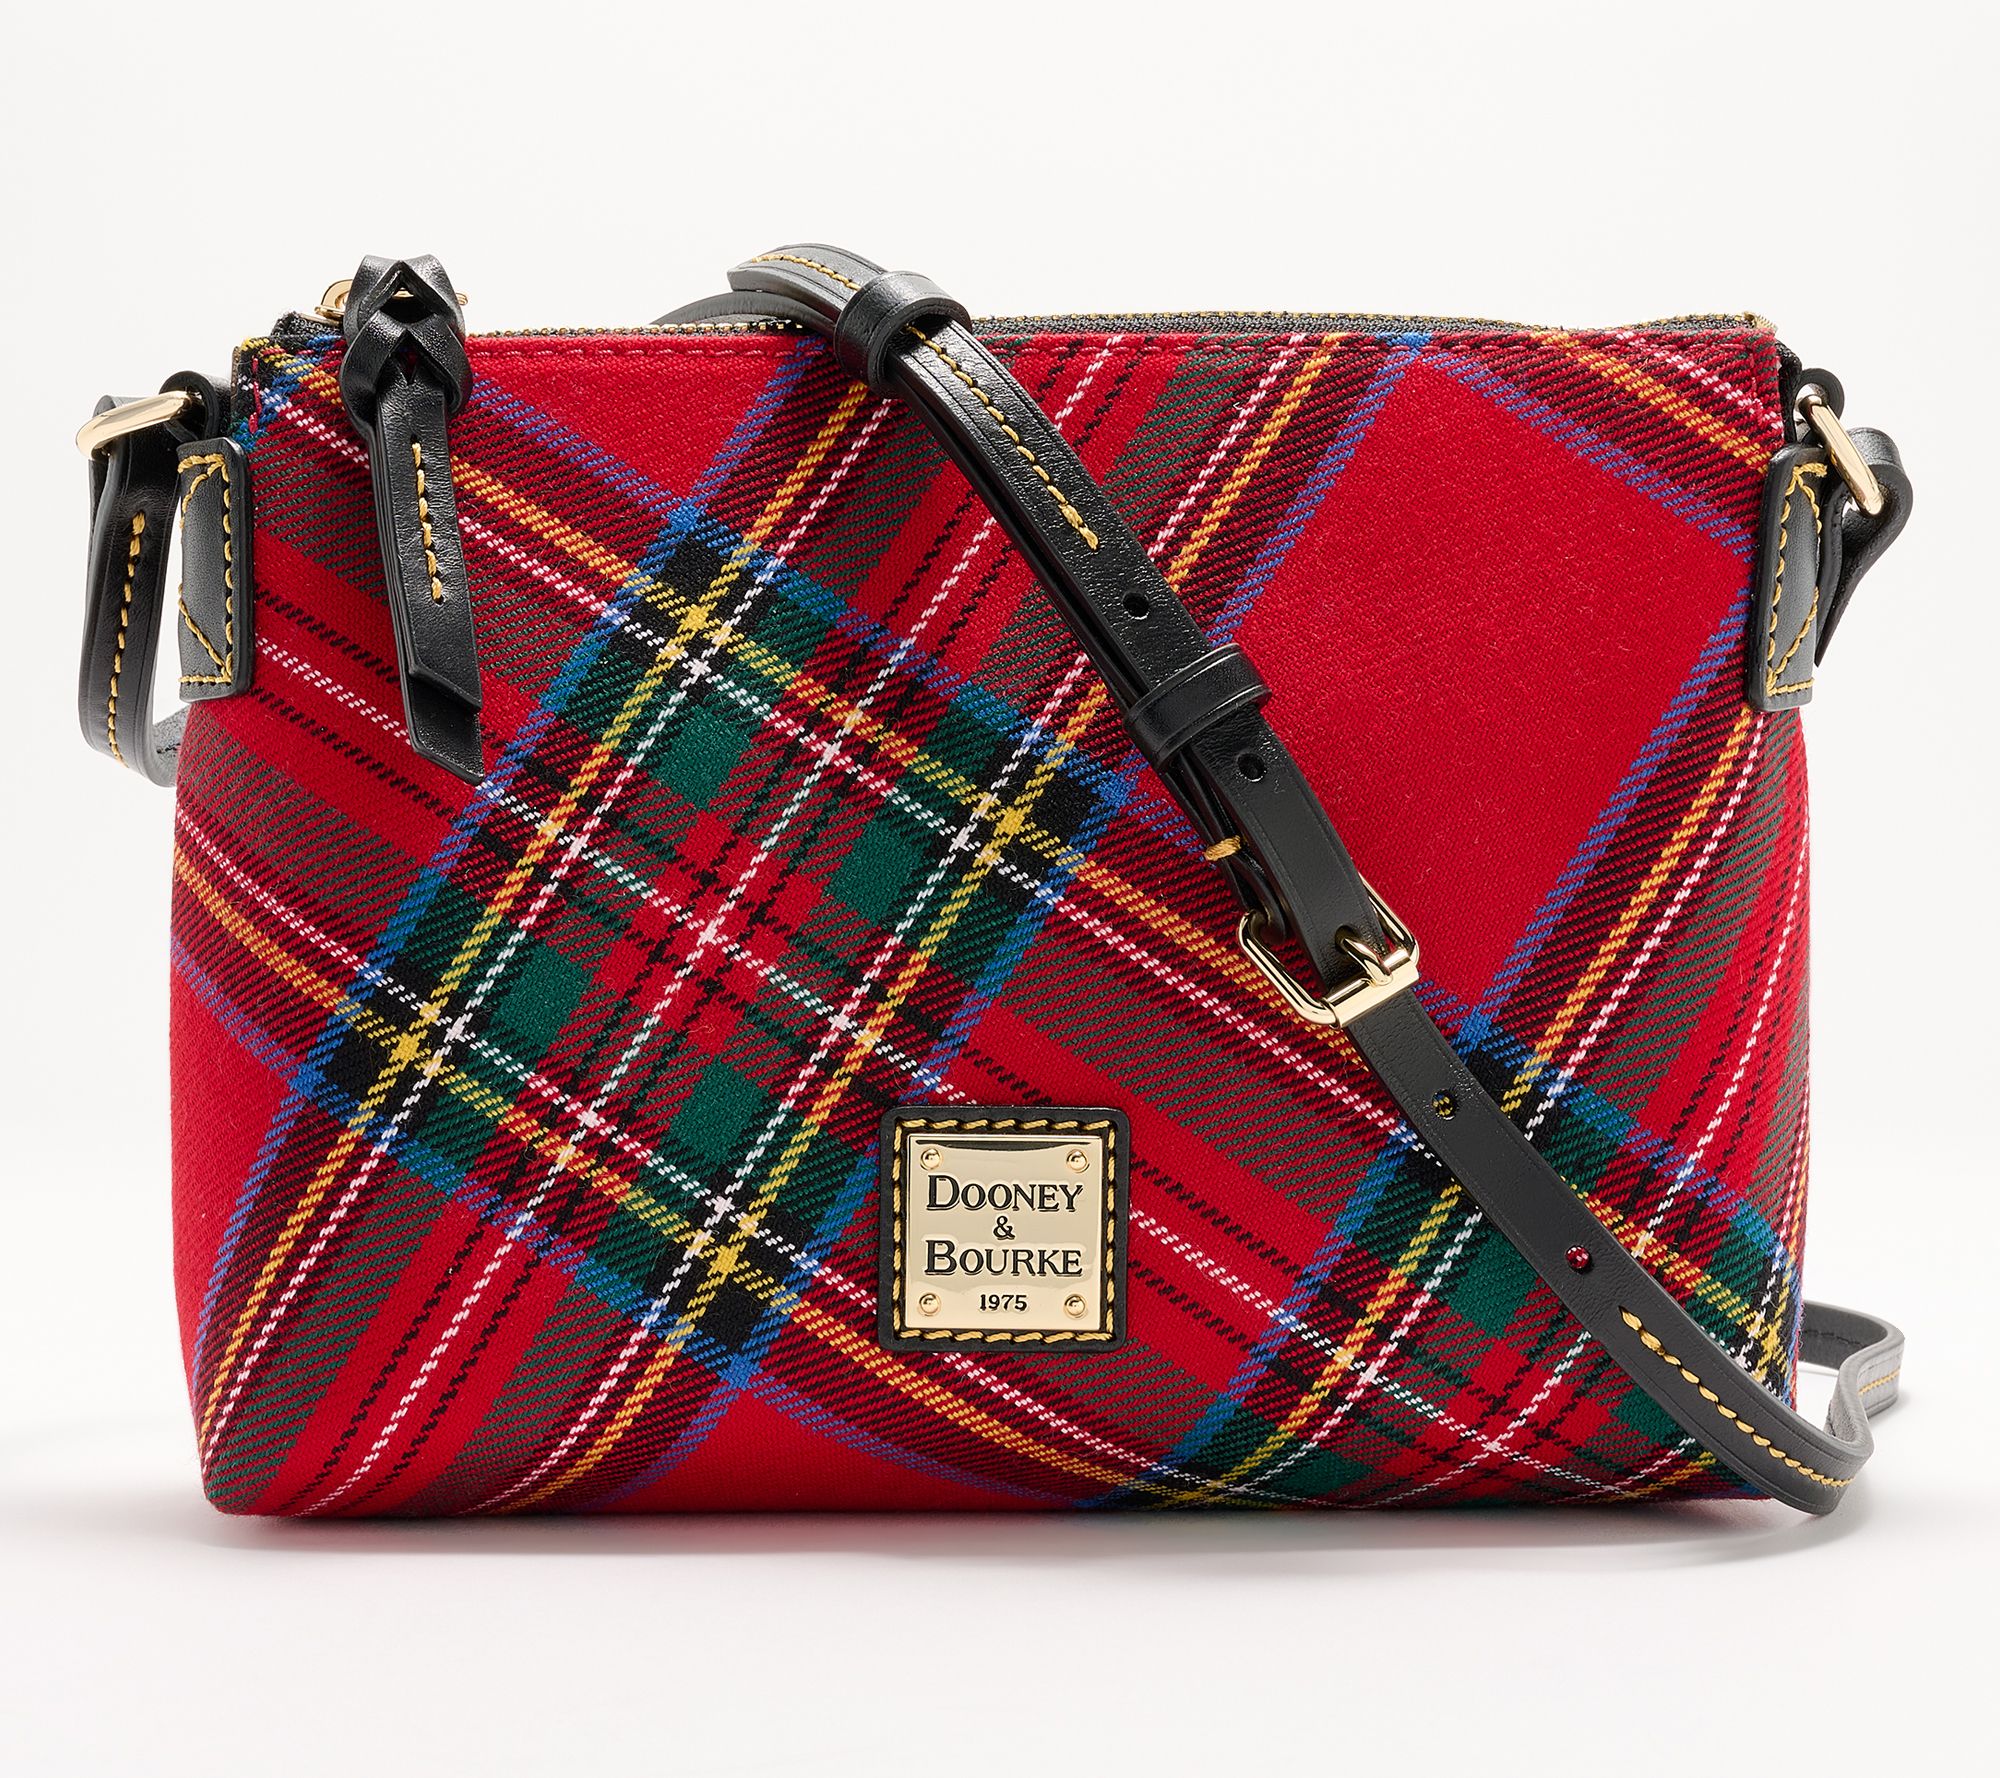 Plaid Pattern Sling Bag, Zipper Front Chest Purse, PU Leather Crossbody Bag  For Women